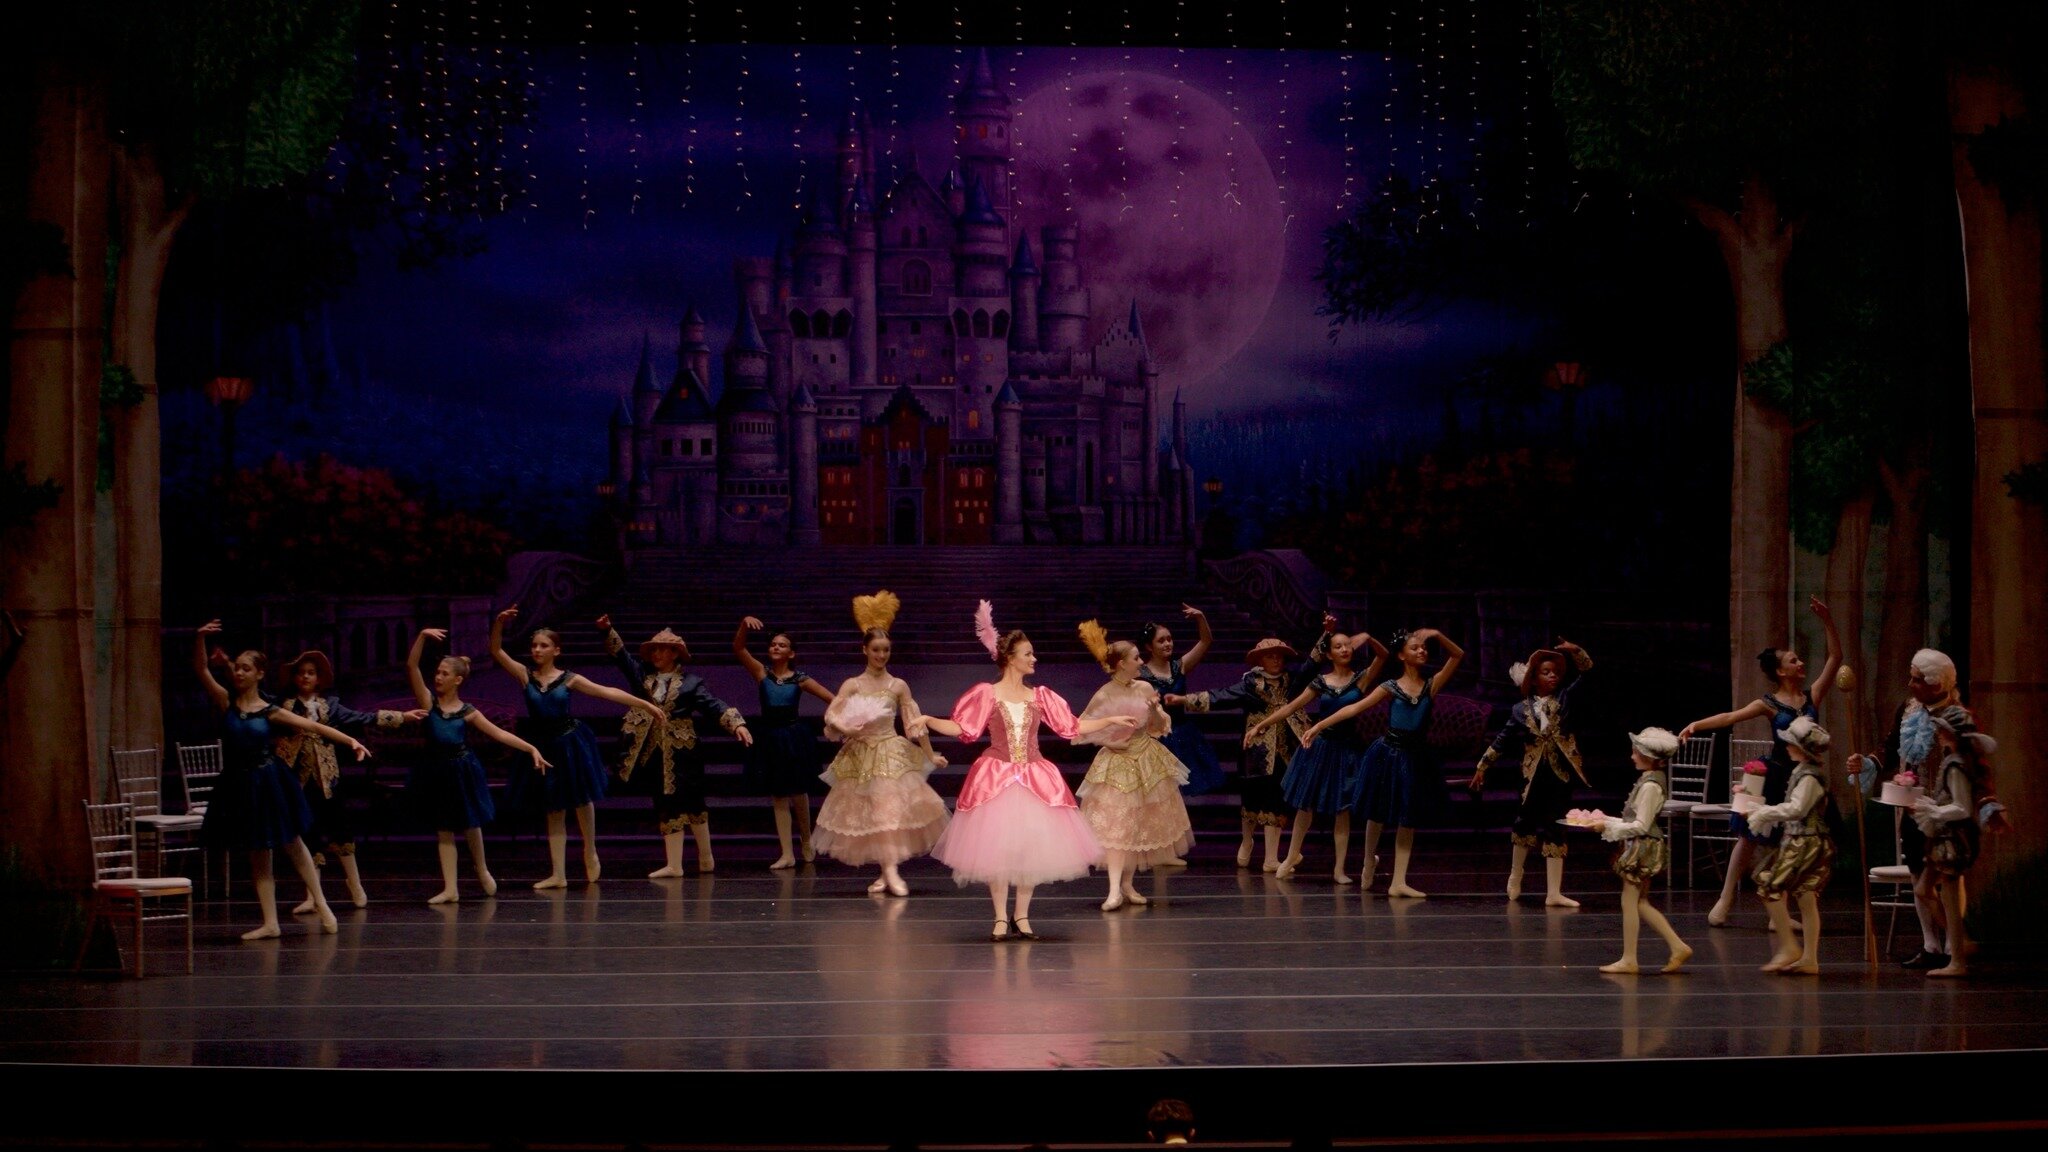 Throwback to May when I filmed performance of Cinderella by @naples_ballet at @artisnaples. The show was filmed with two #blackmagicpocket cameras with wide shot and a close-up.

#throwbackthursday  #naples #naplesfl #blackmagicdesing #bmpcc4k #bmpcc